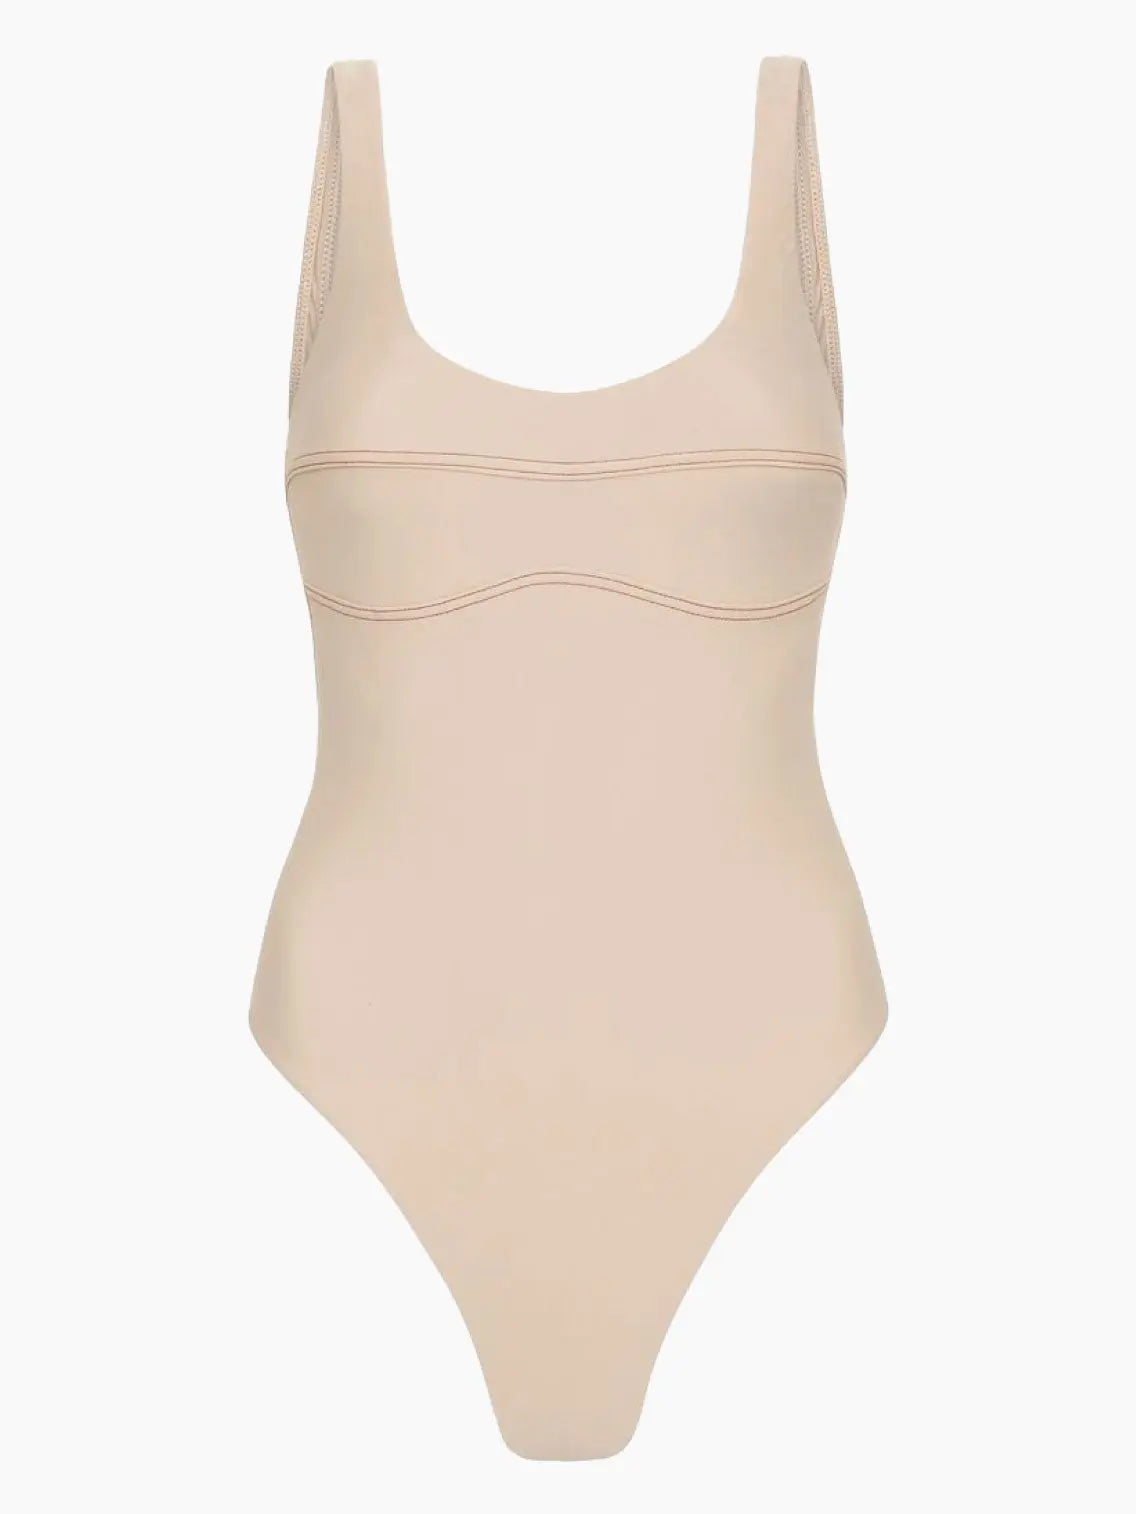 A Beige Contrast One Piece Swimwear with a scoop neckline and wide shoulder straps. The swimsuit features subtle seam detailing under the bust, creating a flattering silhouette. The fabric appears smooth and stretchy, designed for a snug fit. Now available at Bassal Store in Barcelona!